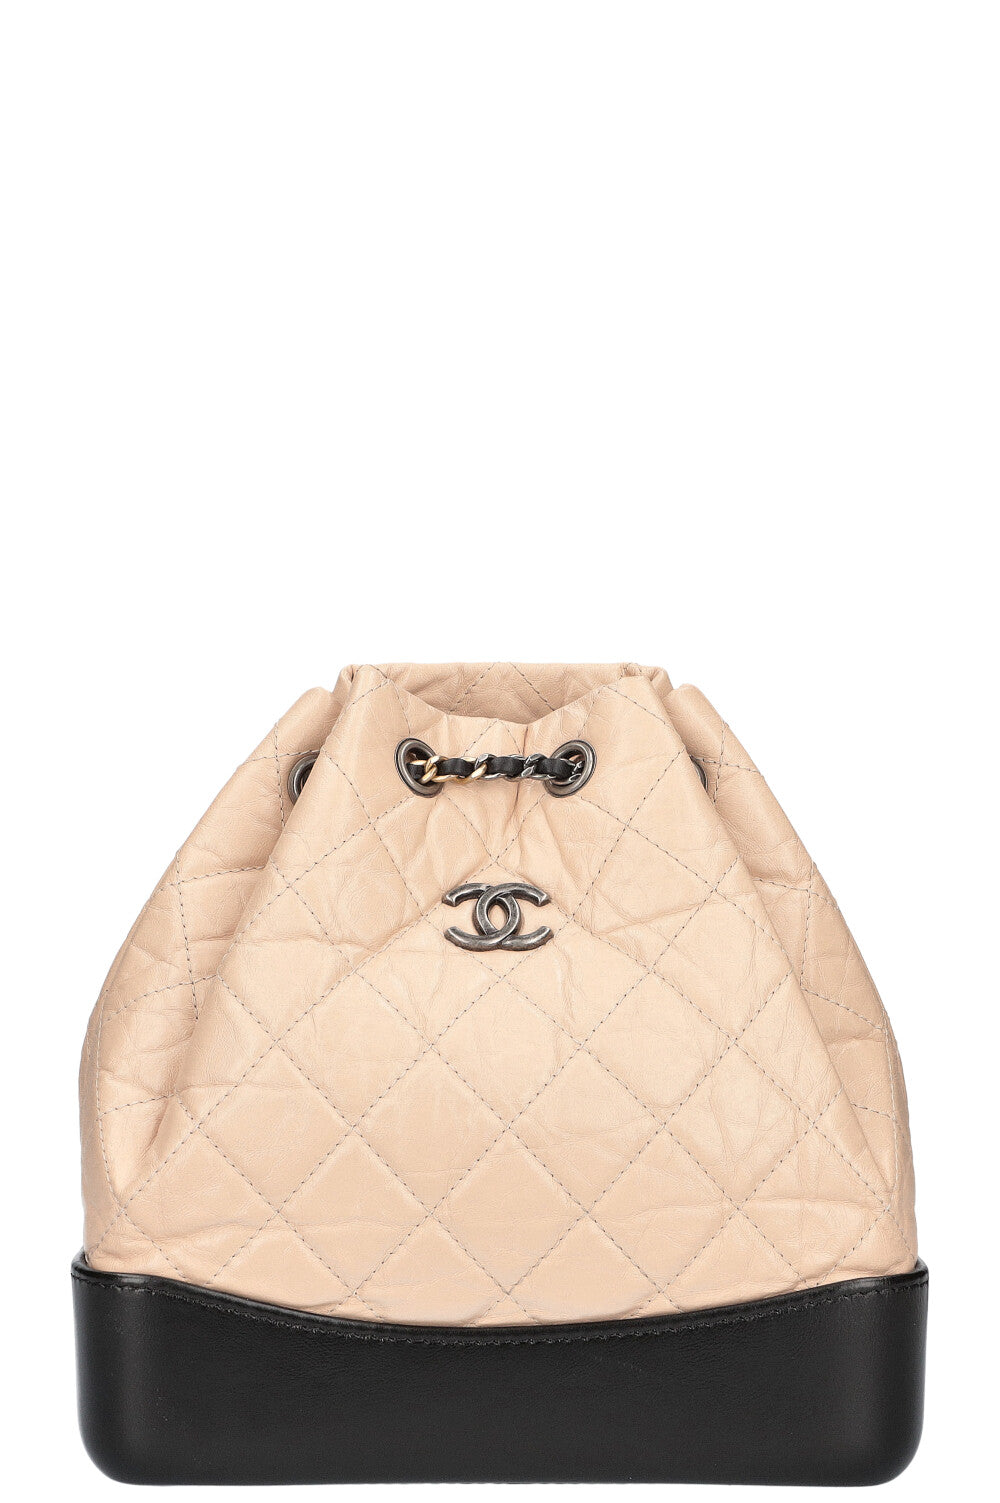 CHANEL Gabrielle Backpack